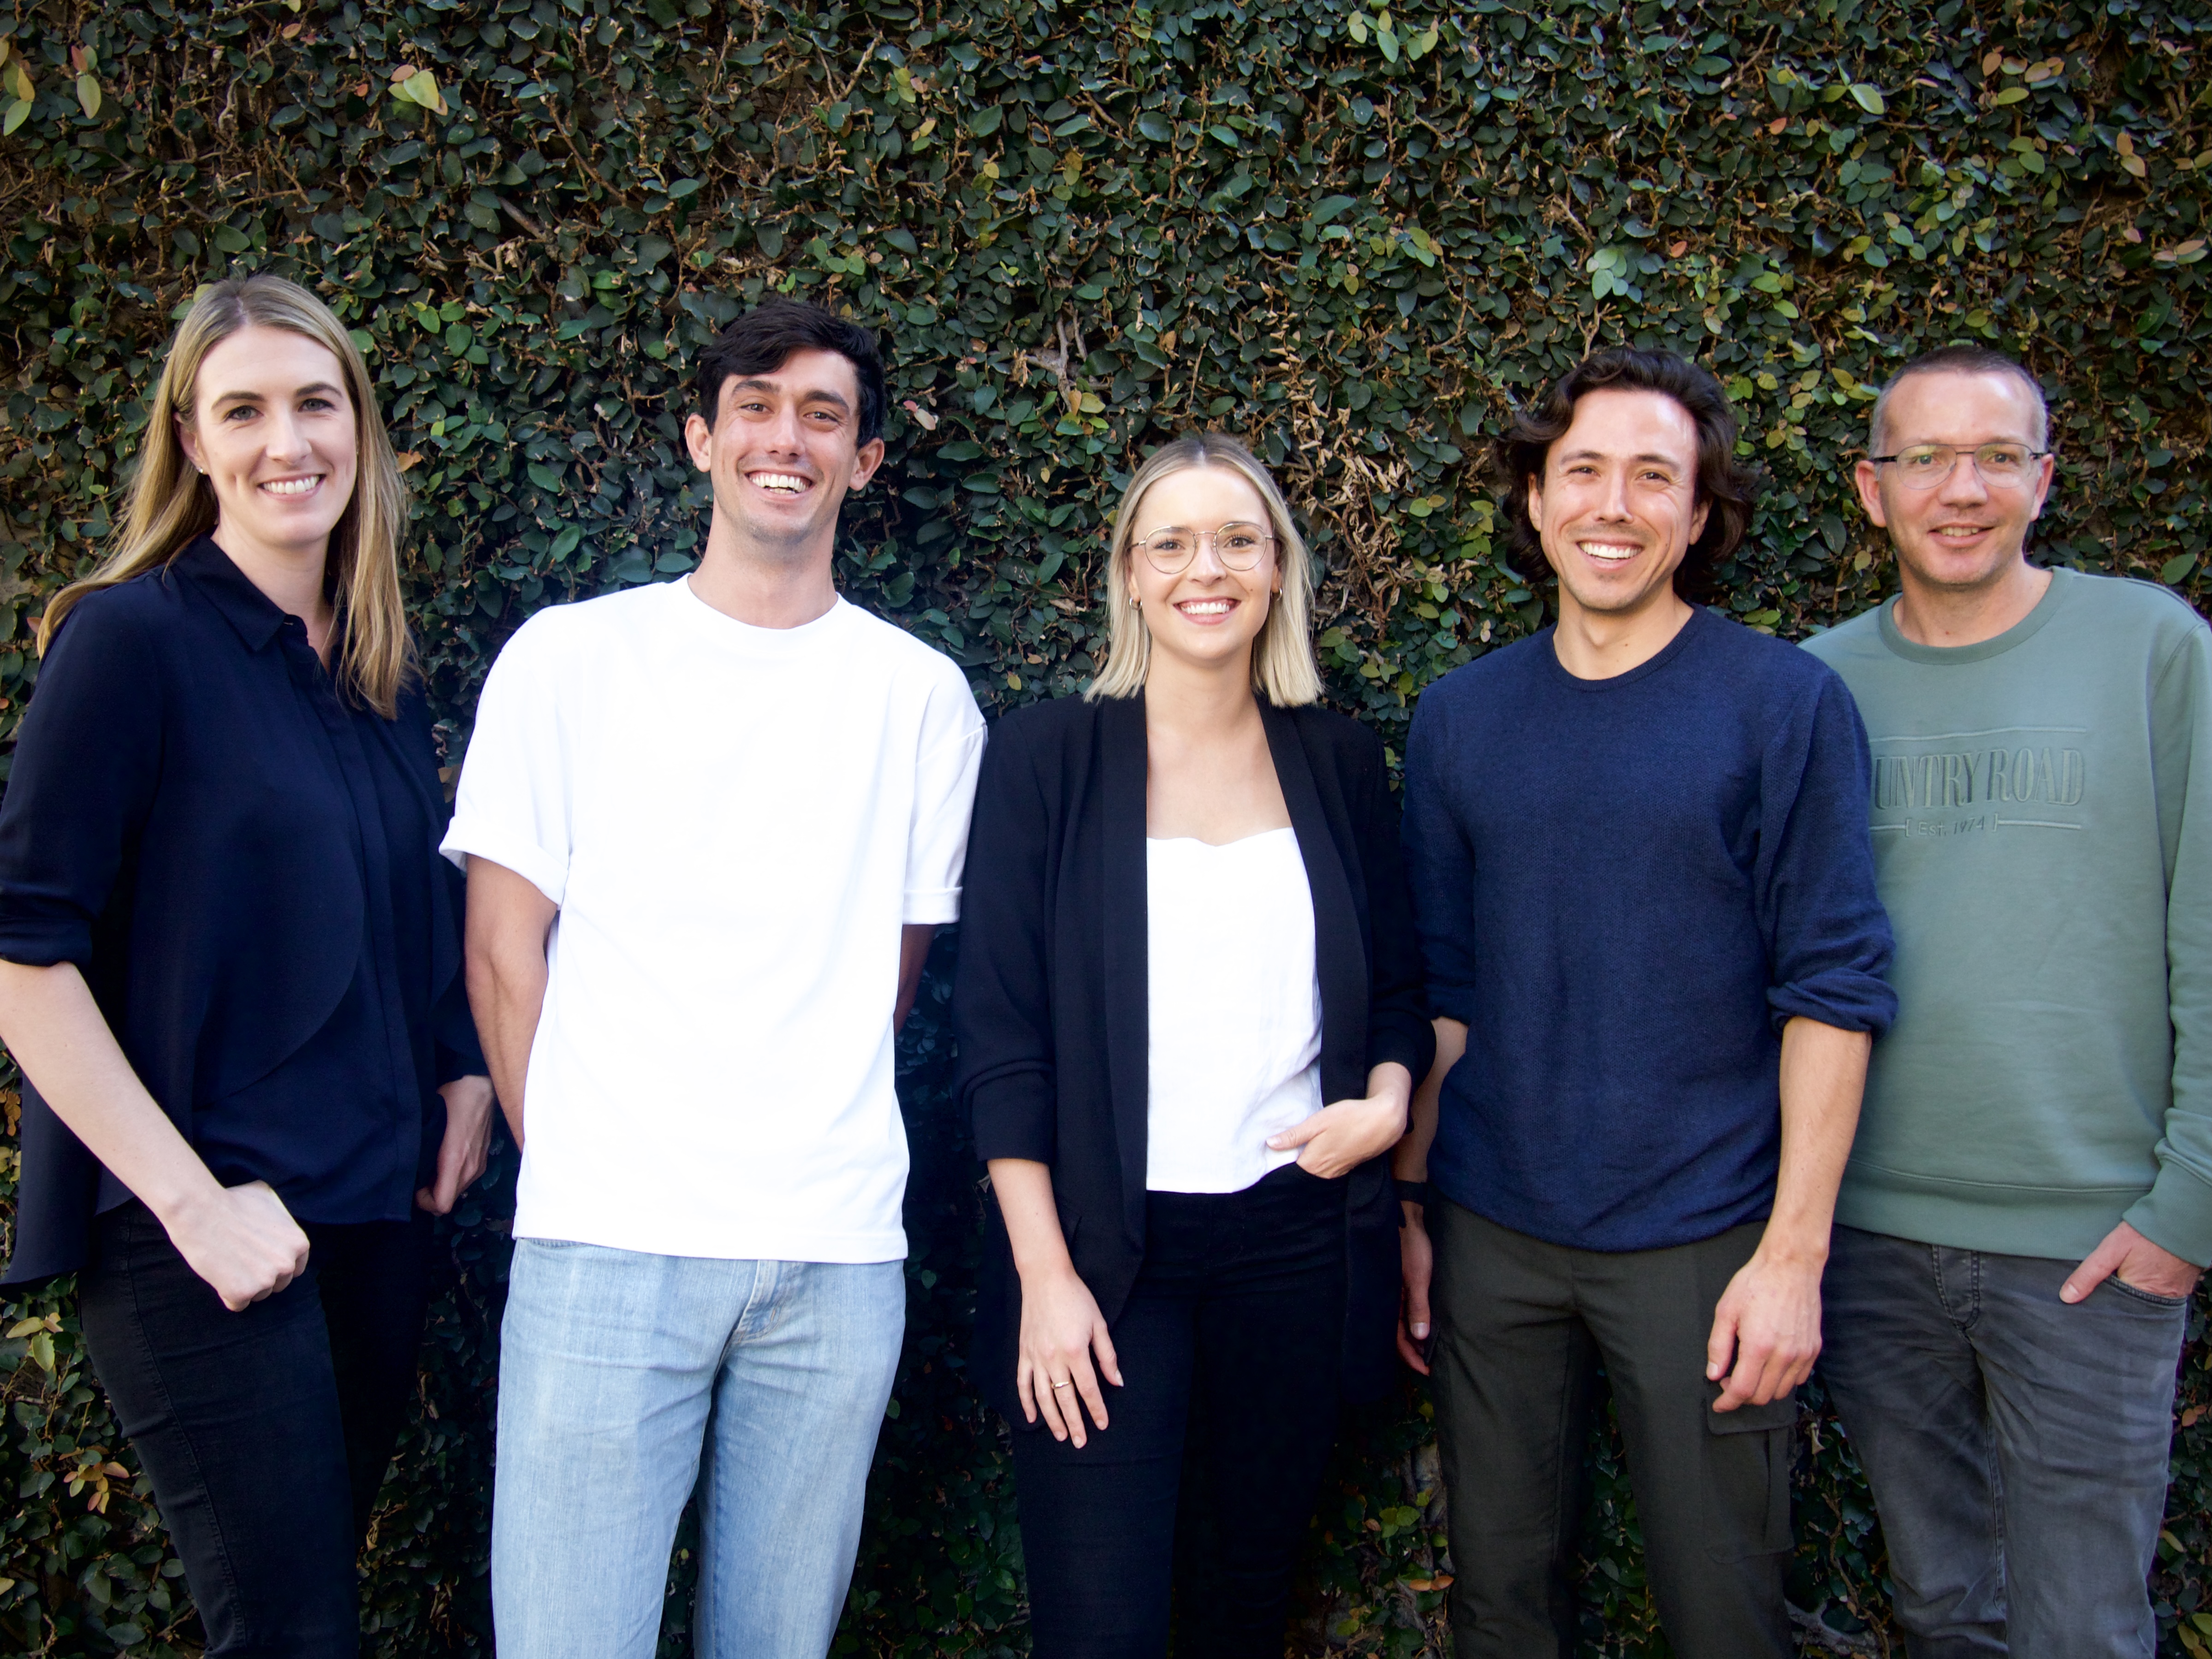 A group photo of The Fund Australia’s team (left to right): Elicia McDonald, Adrian Petersen, Georgia Vidler, Ed Taylor and Todd Deacon